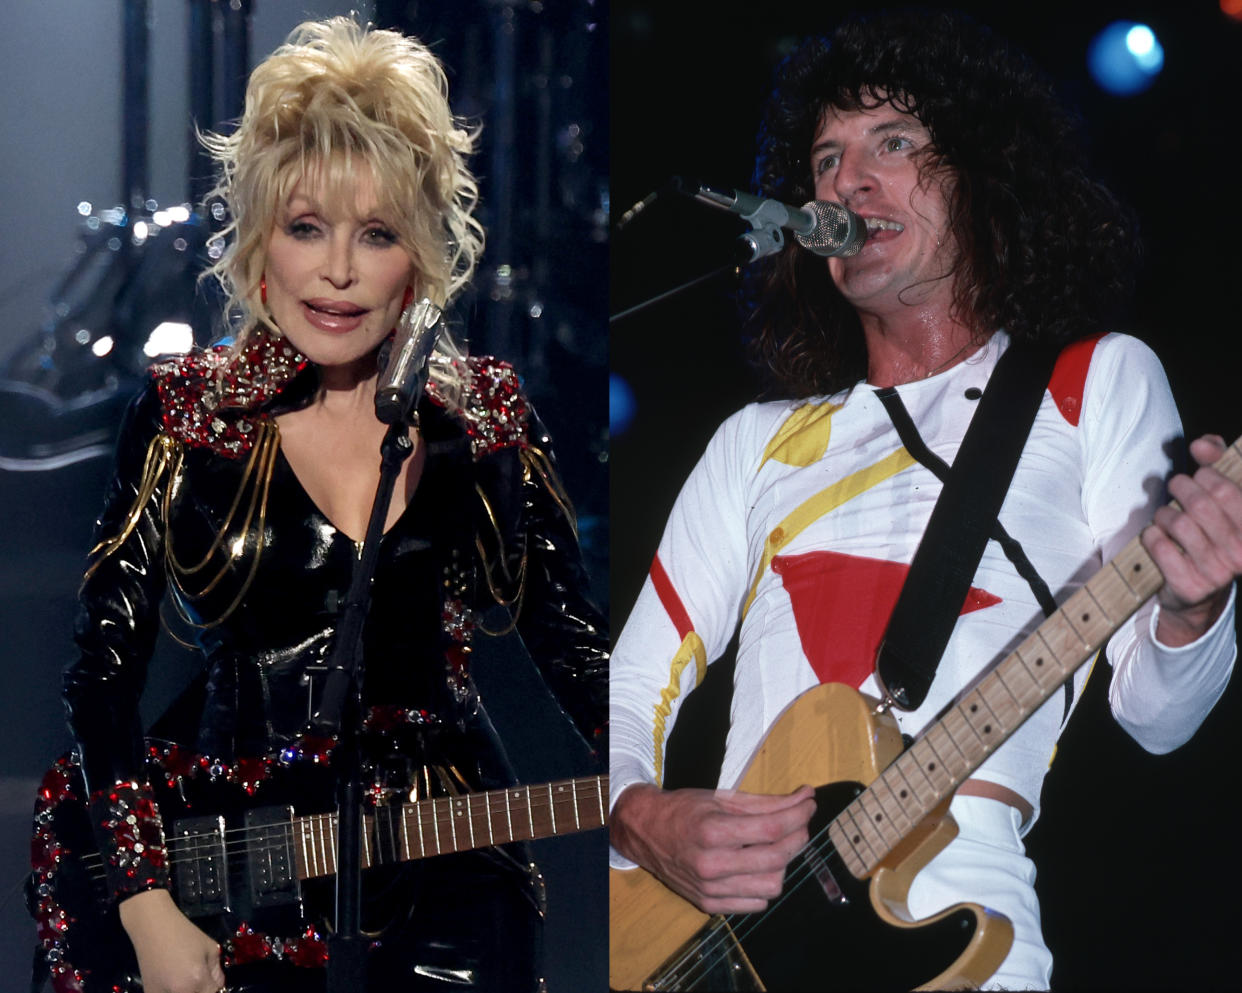 Dolly Parton at the 2022 Rock & Roll Hall of Fame induction ceremony, and REO Speedwagon's Kevin Cronin in 1981. (Photos: Getty Images)